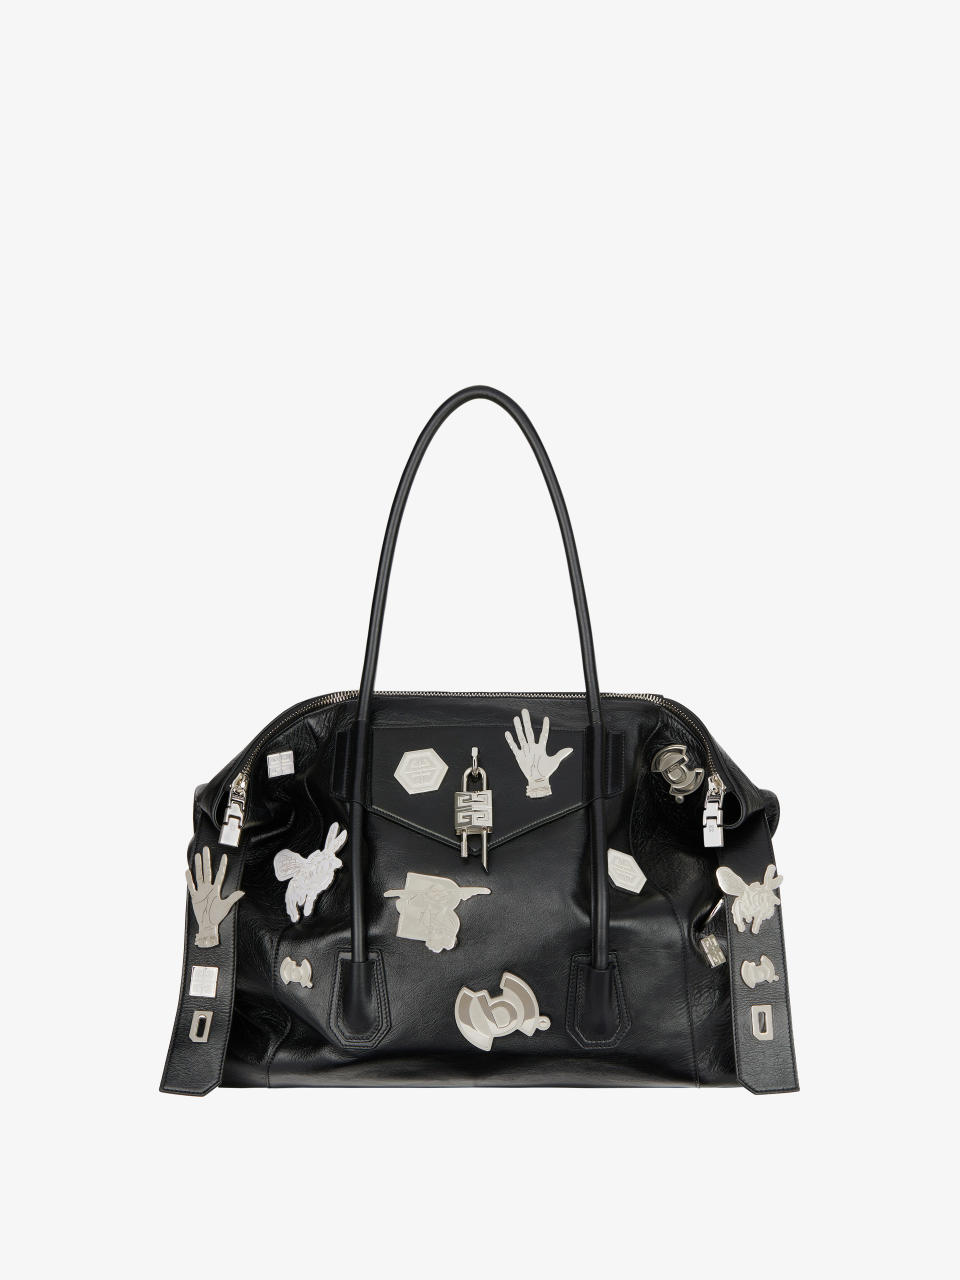 One of the Givenchy x Bstroy bags.